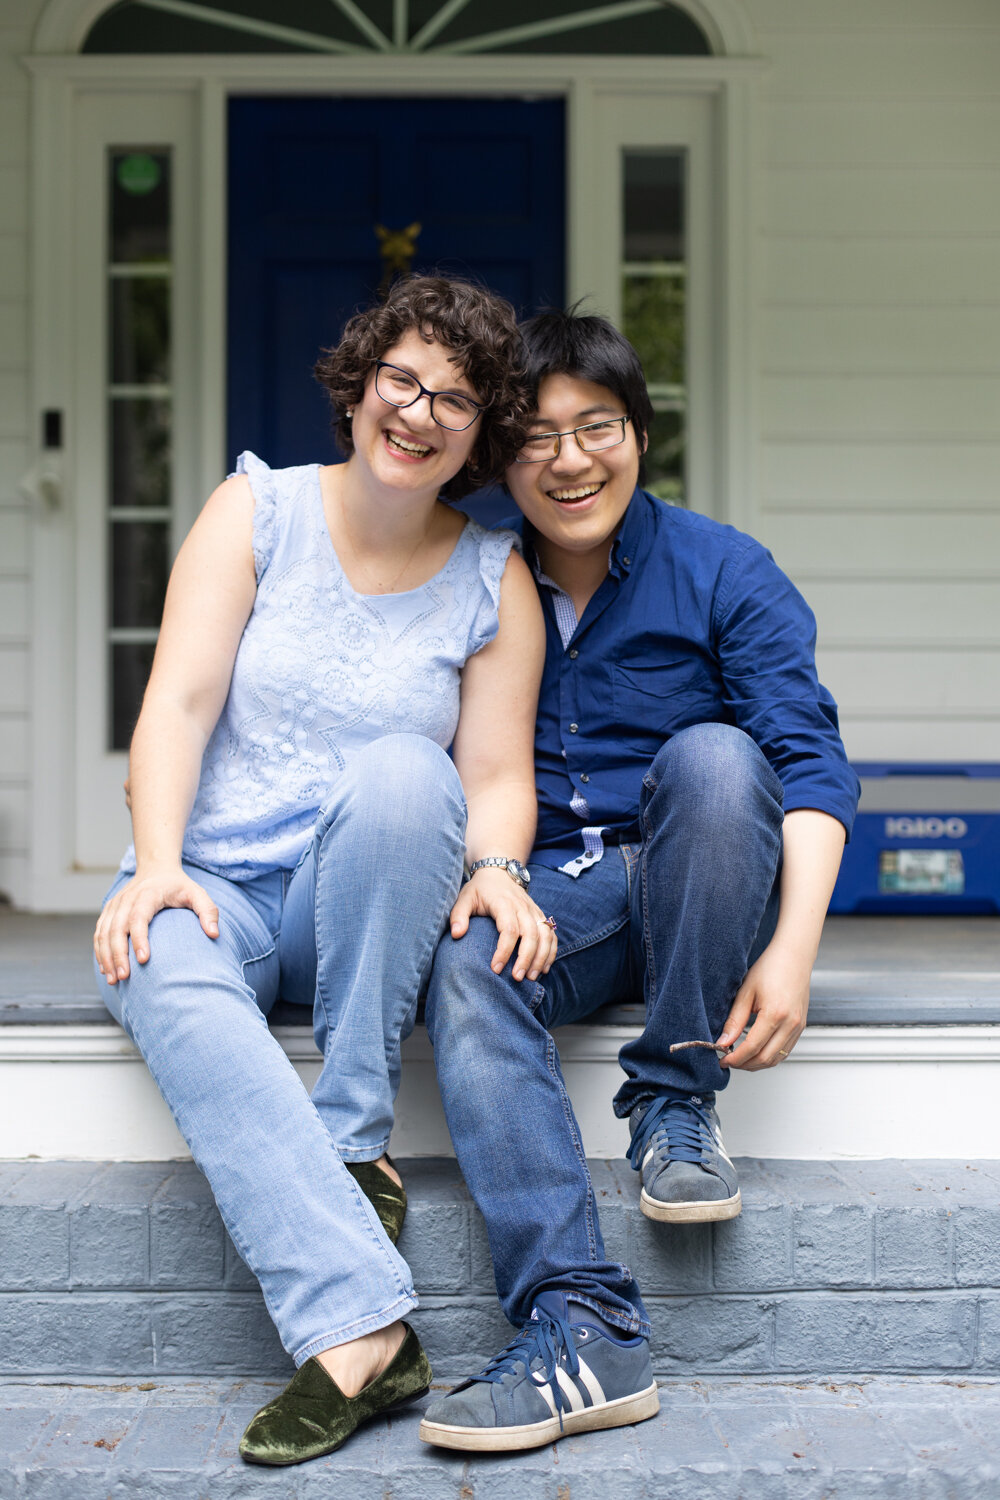 Couple sit on front steps and laugh together during family photo session